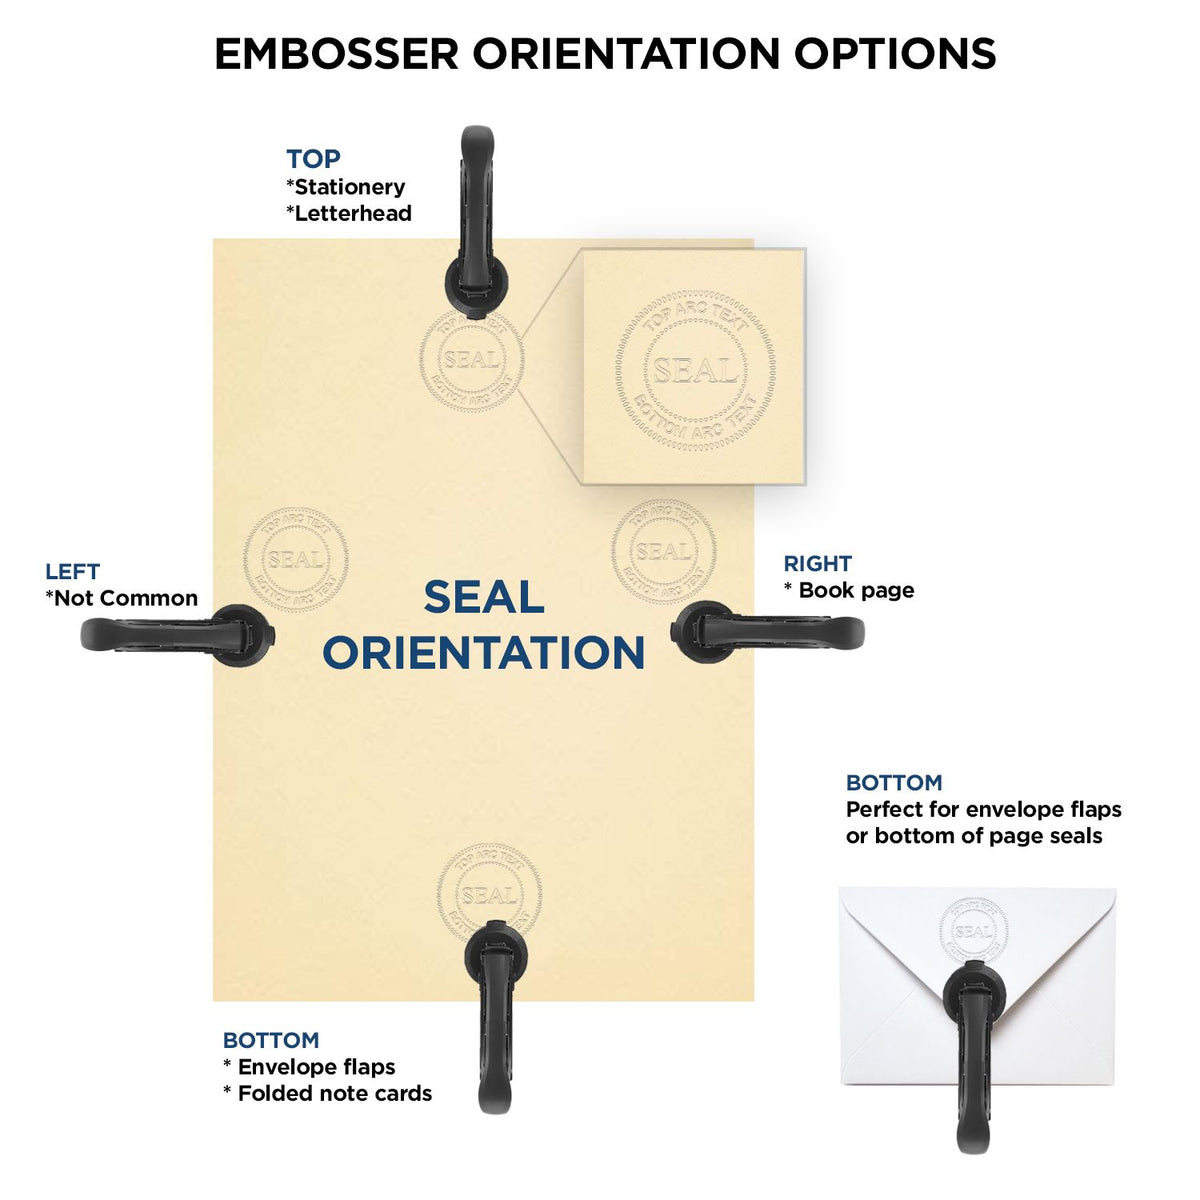 An infographic for the Heavy Duty Cast Iron Missouri Geologist Seal Embosser showing embosser orientation, this is showing examples of a top, bottom, right and left insert.